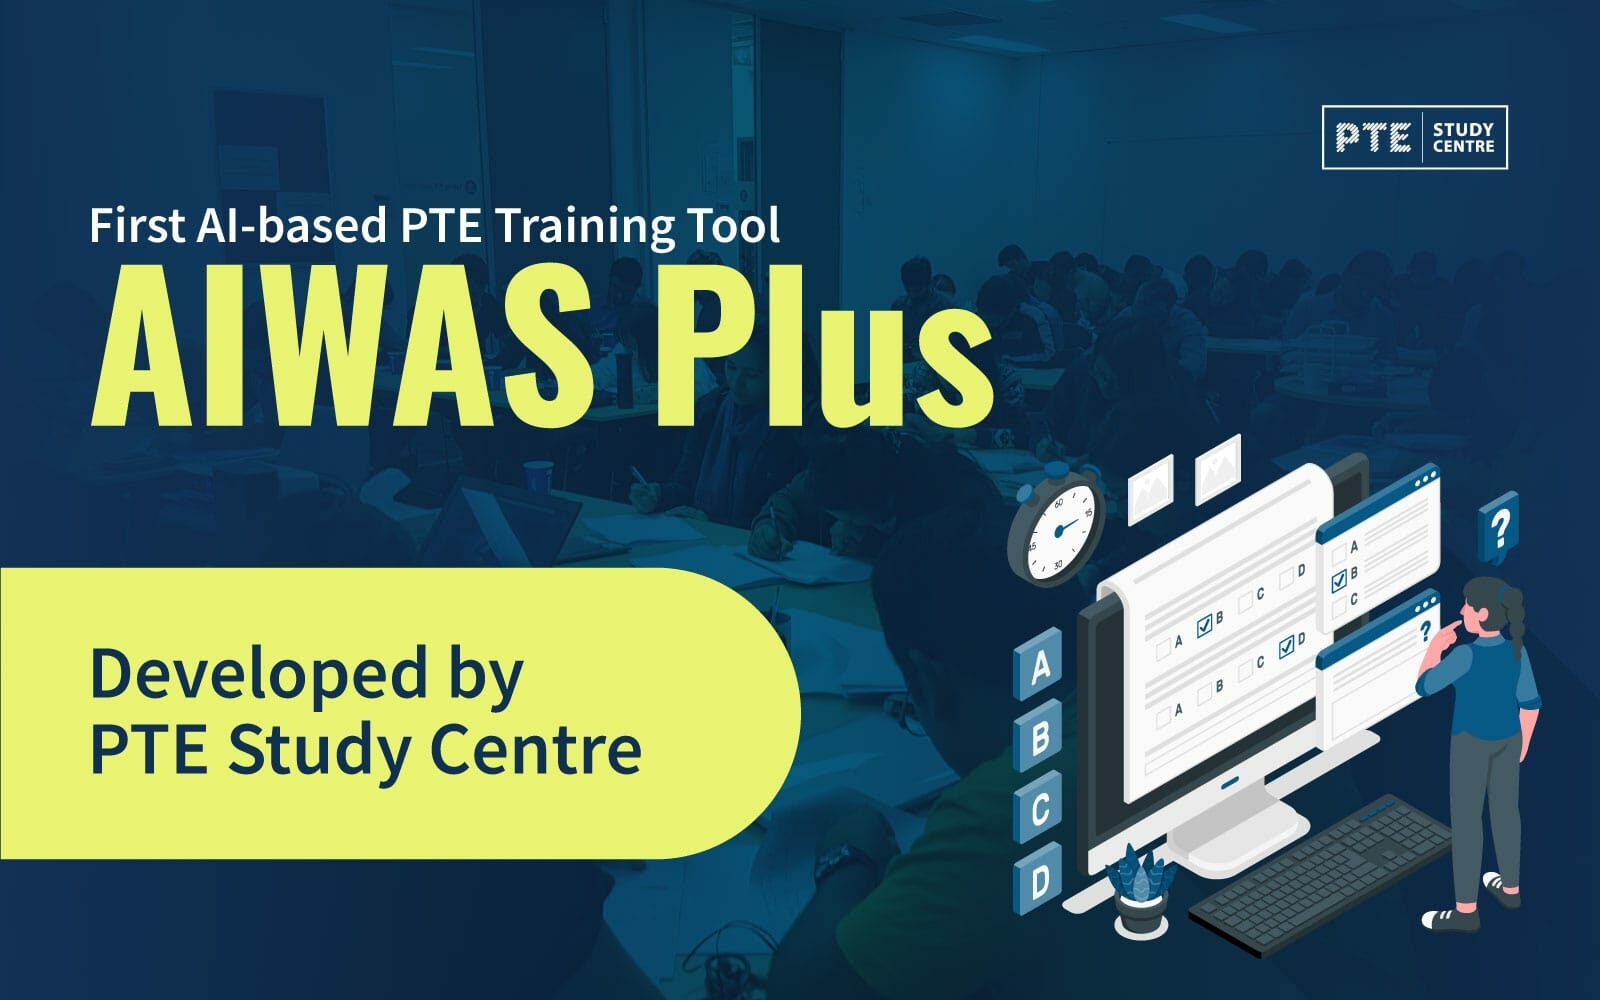 First AI-based PTE Training Tool: AIWAS Plus